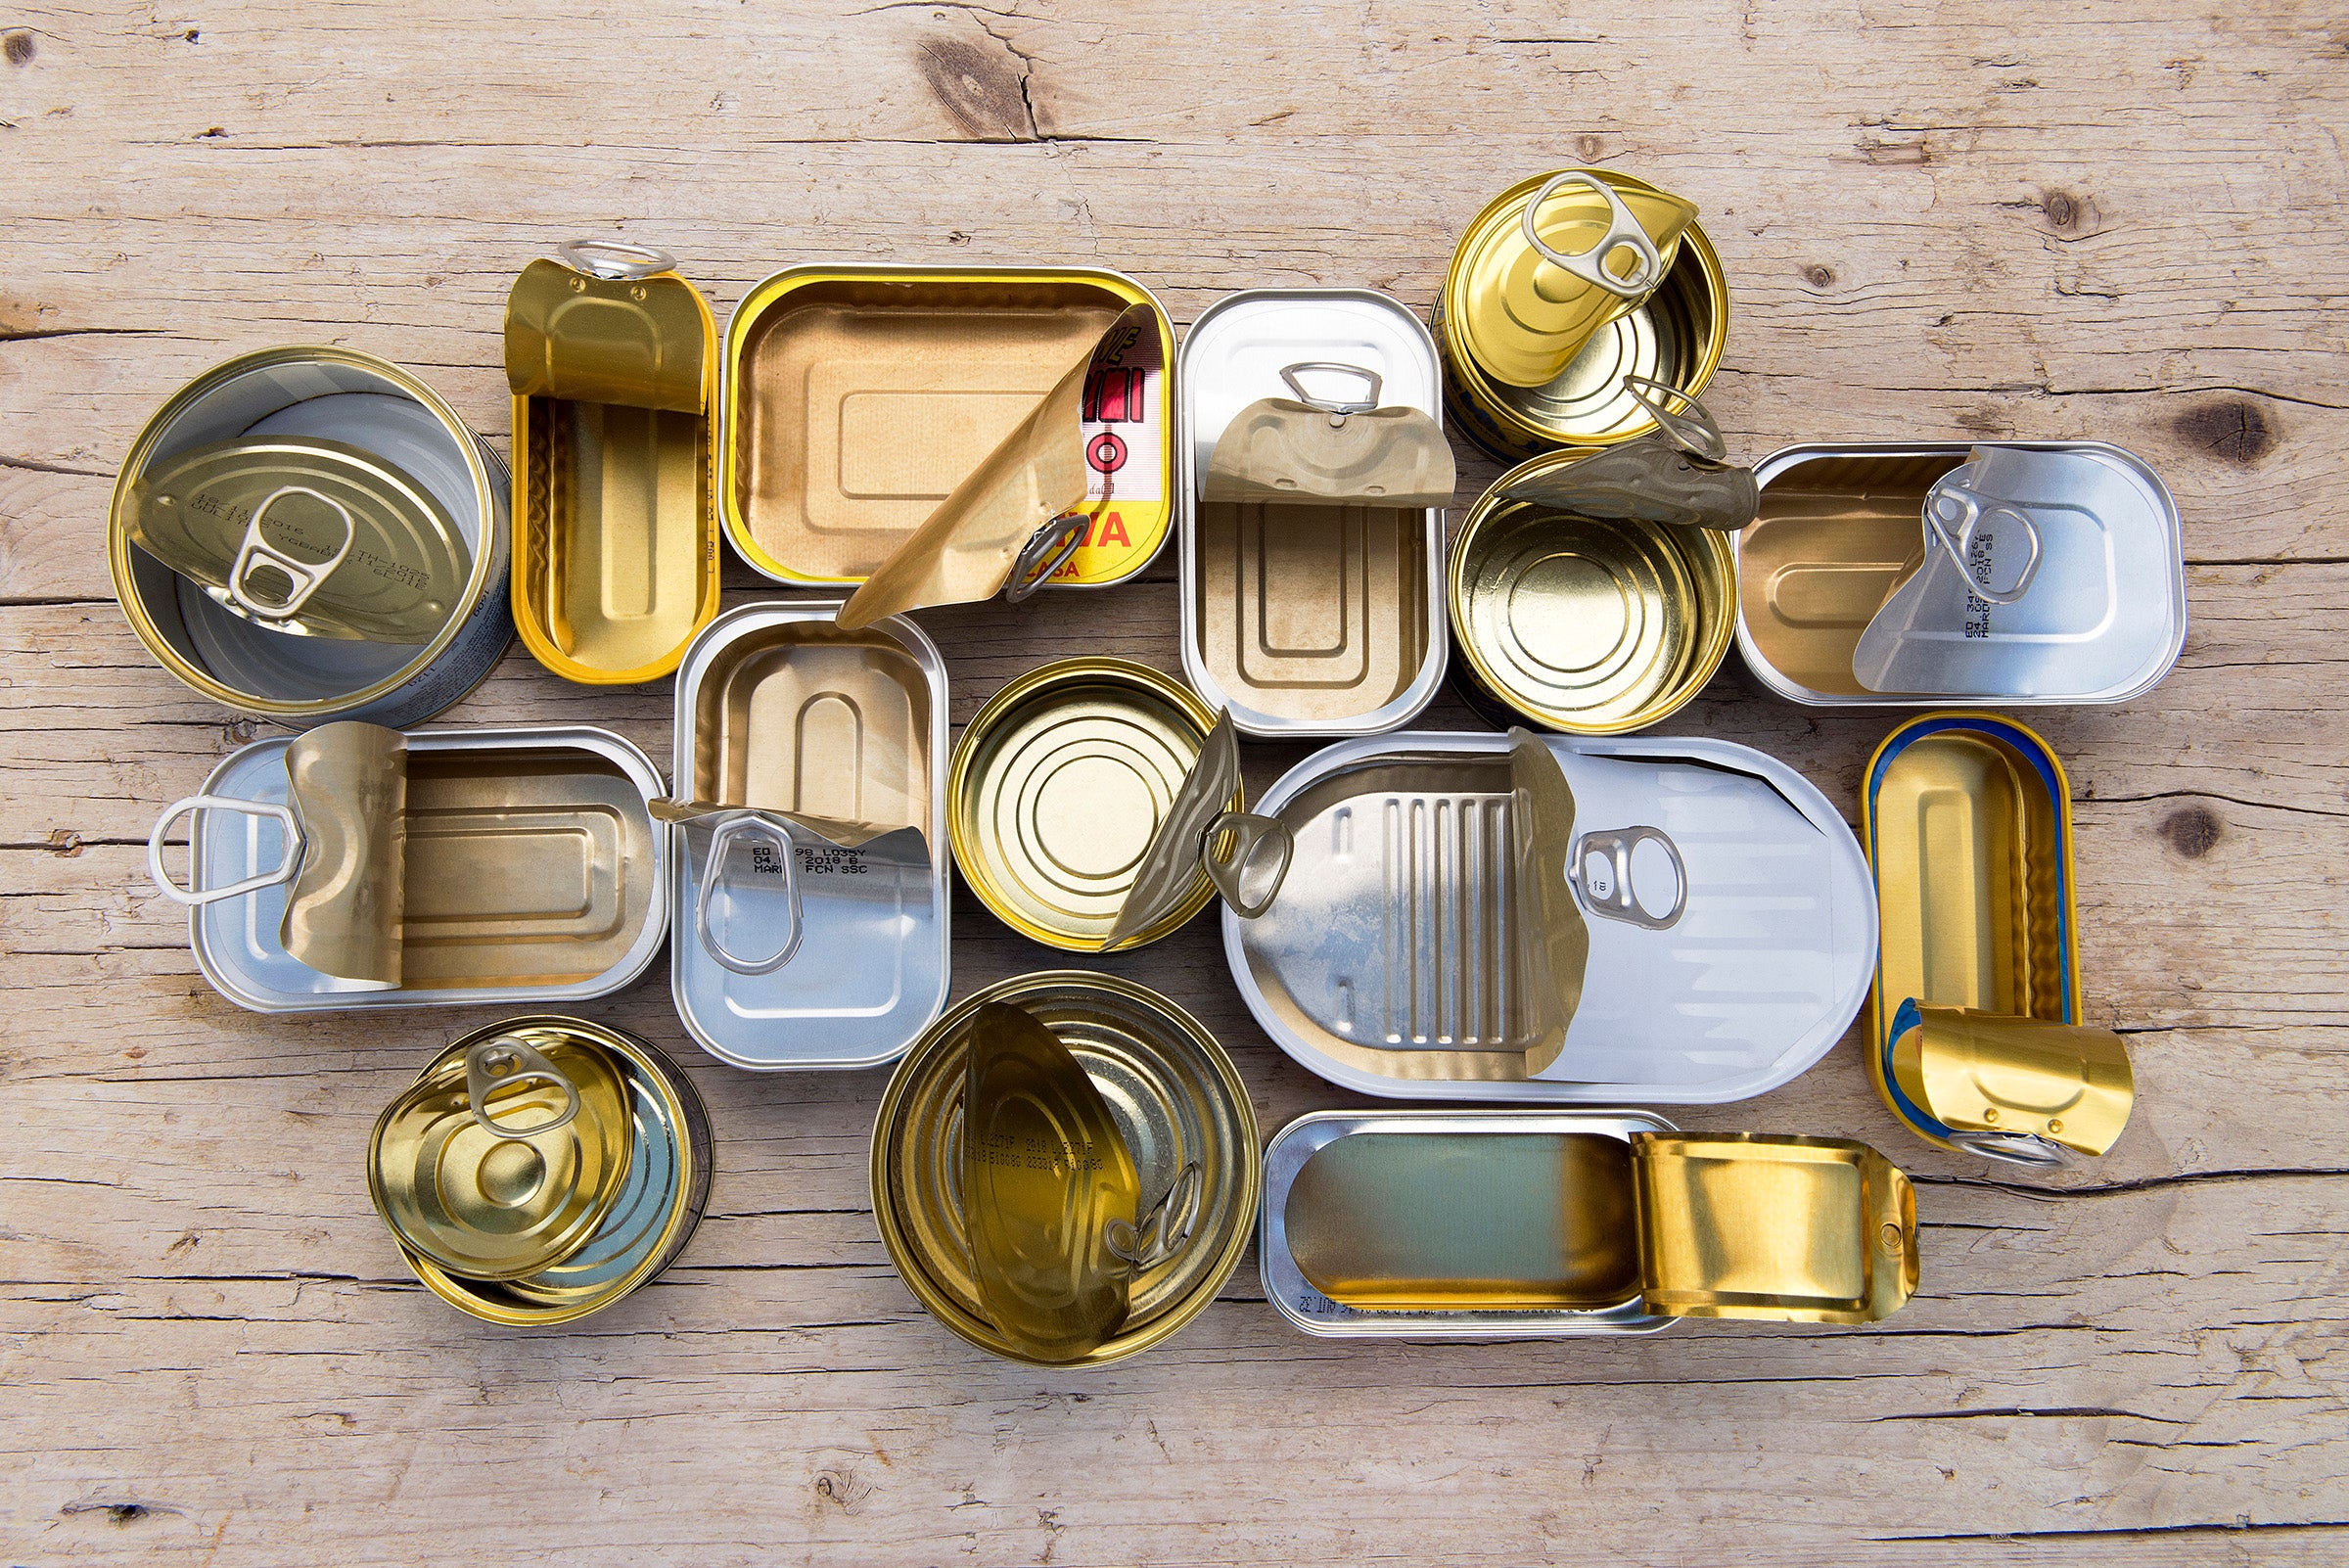 Can Don T Cooking Canned Foods In Their Own Containers Comes With Risks Scientific American